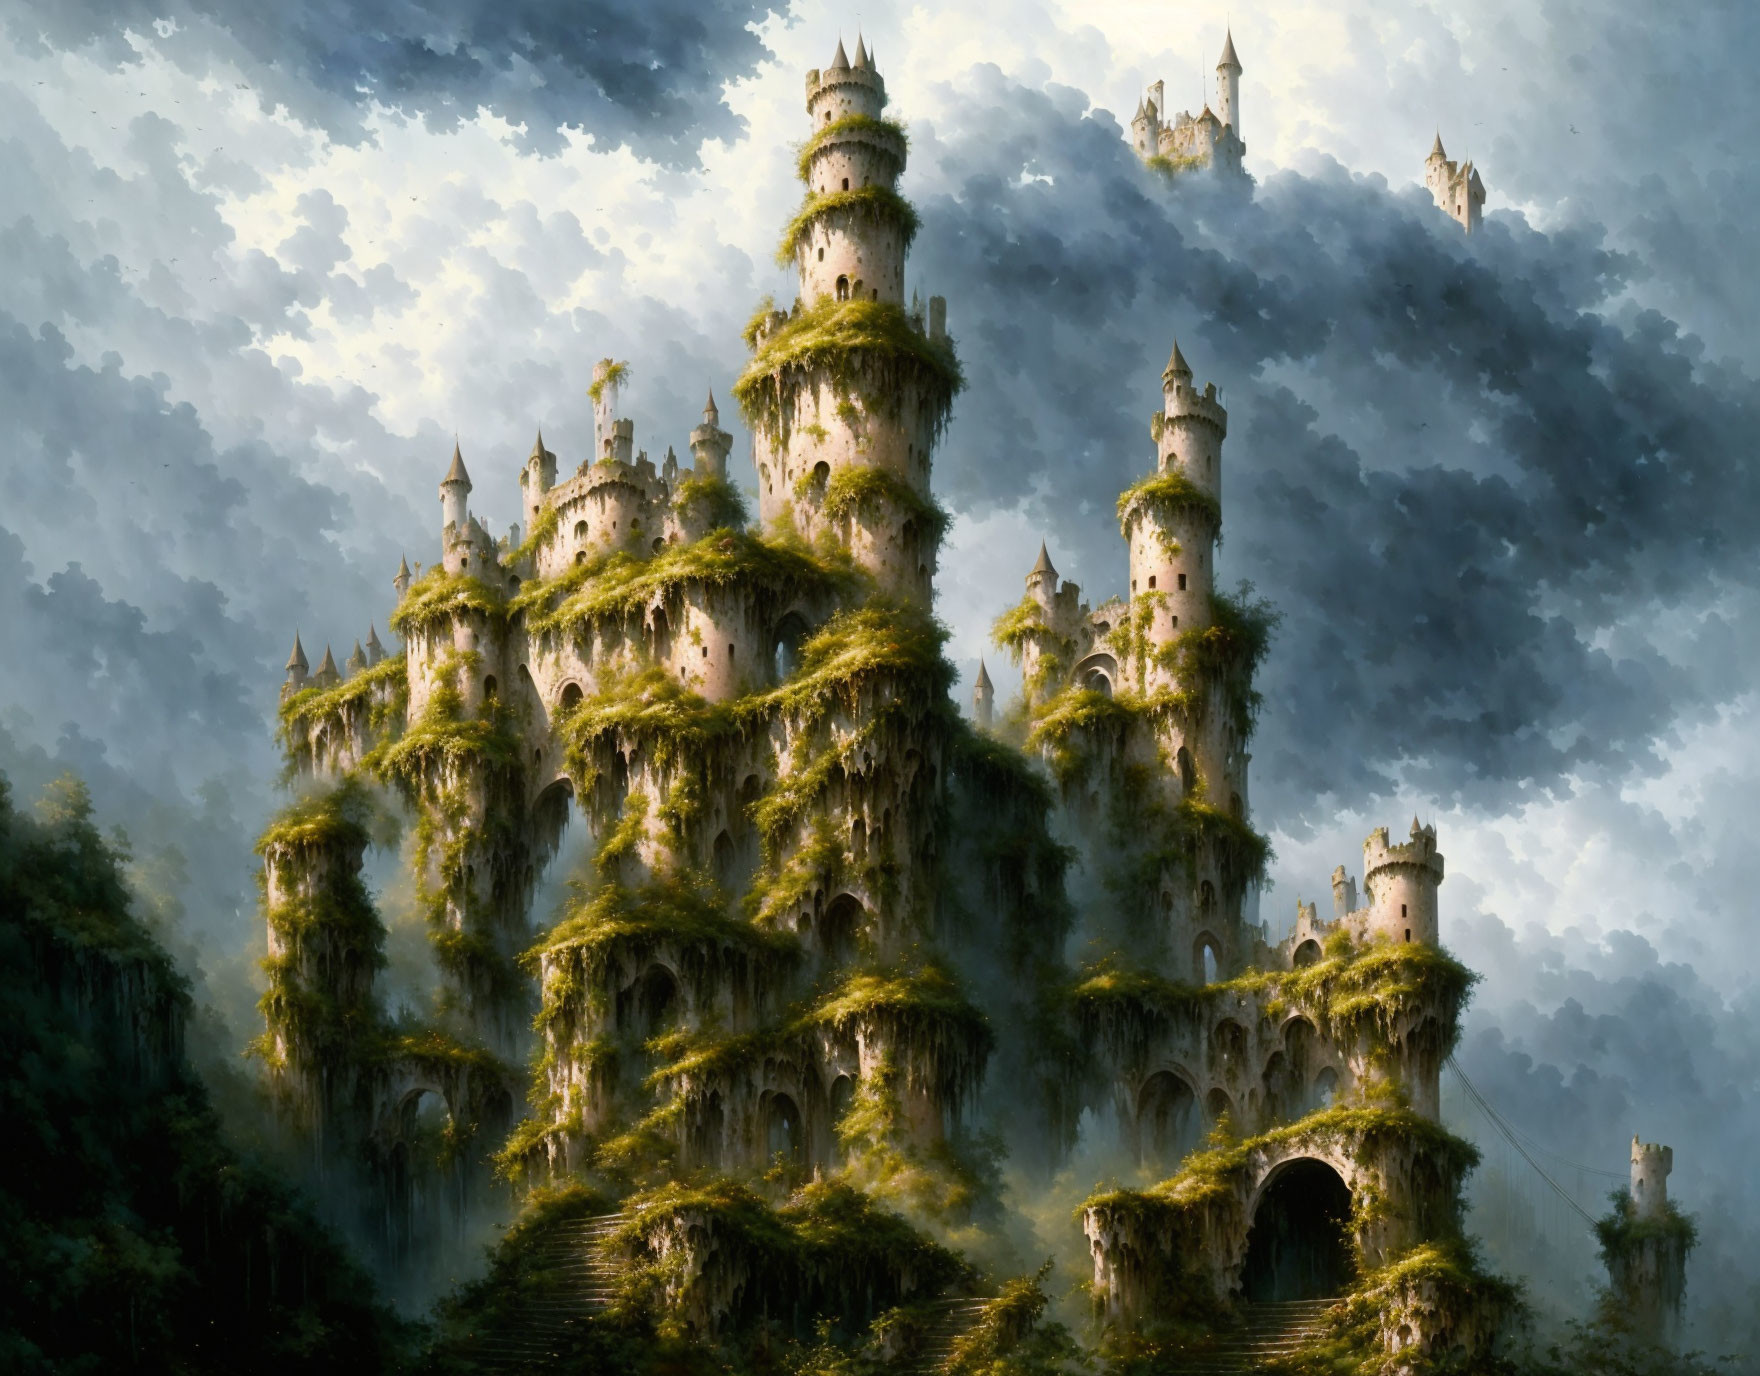 Ethereal fantasy castle in mist with overgrown vegetation